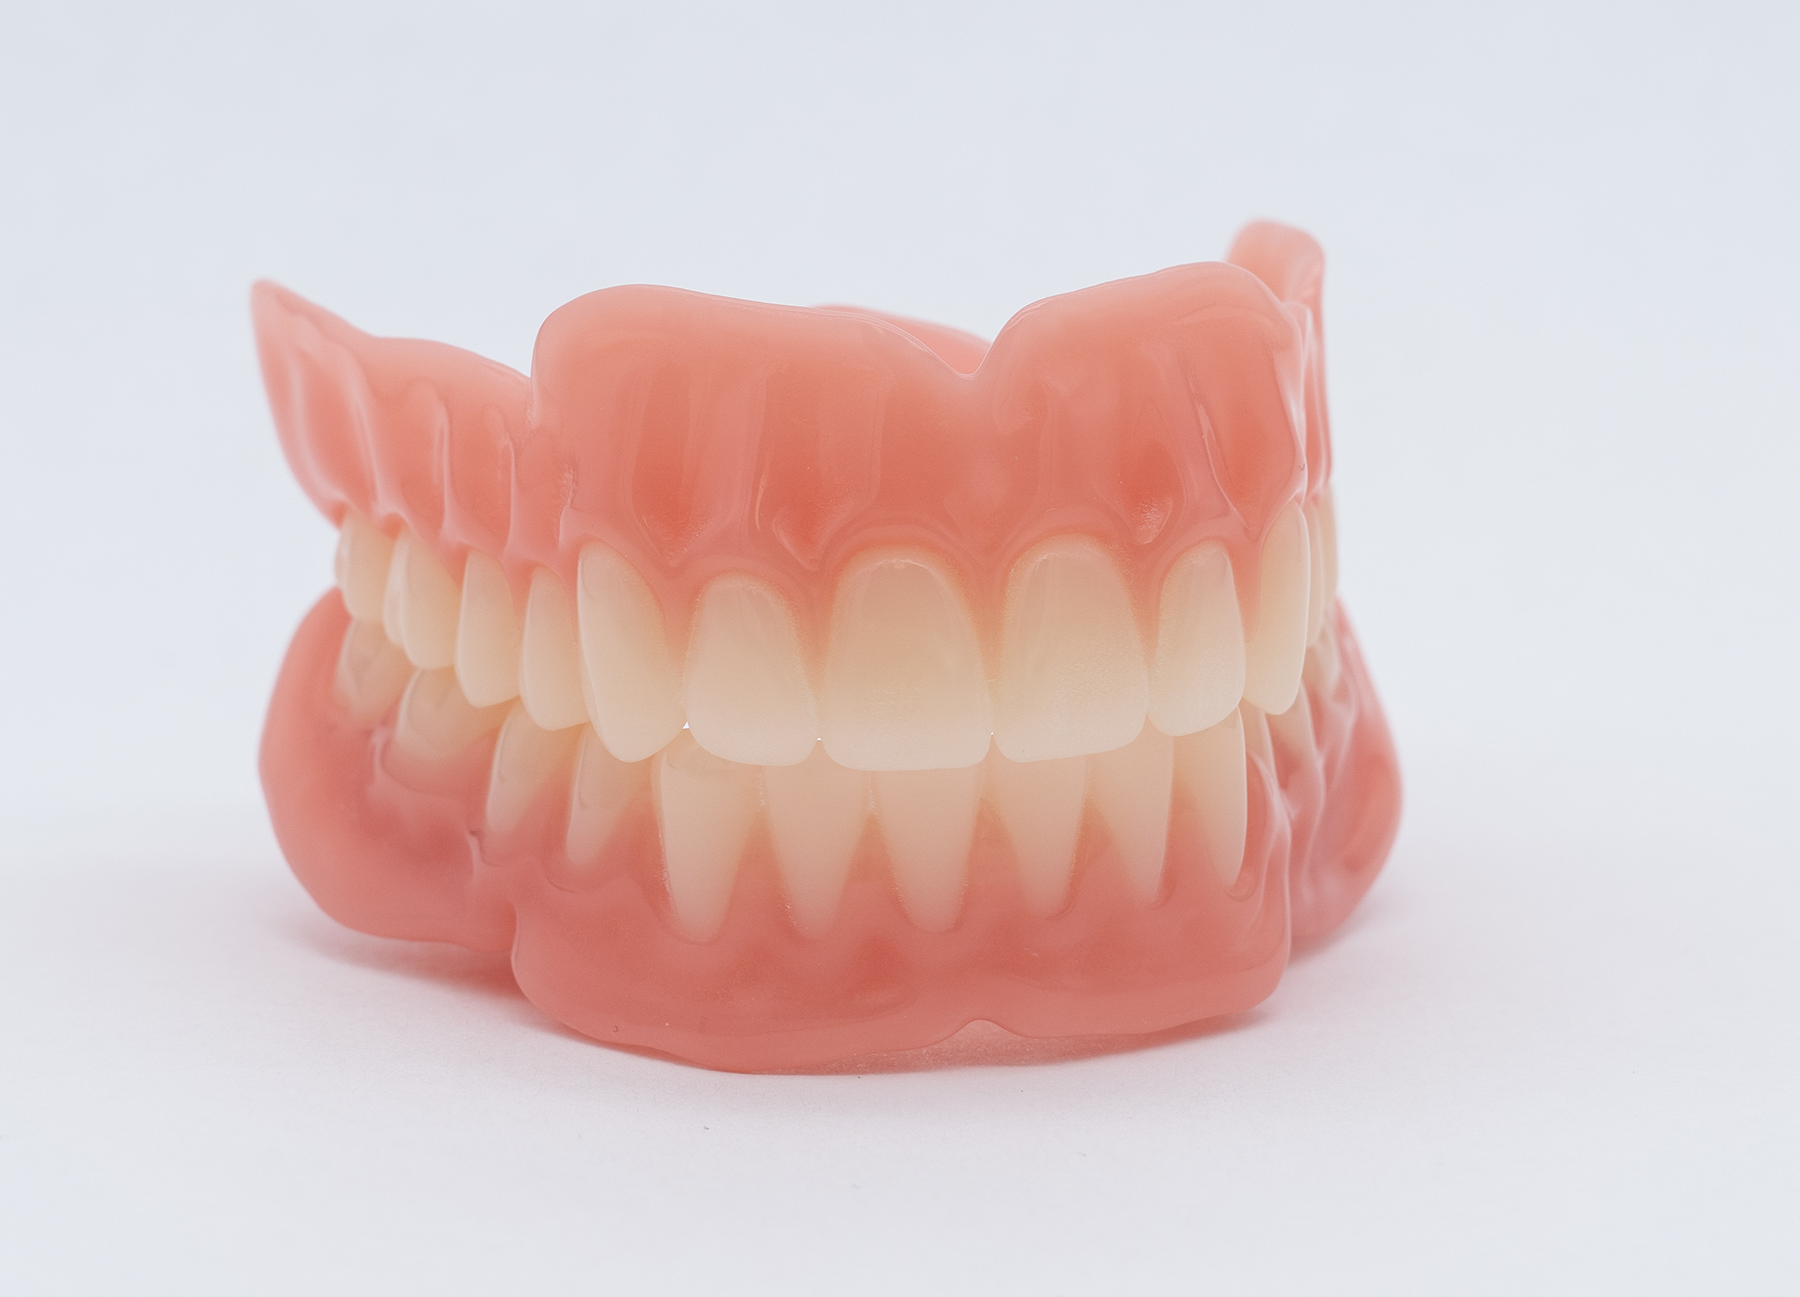 Multi-Material Jetted Monolithic Dentures from 3D Systems | Image Credit: © 3D Systems